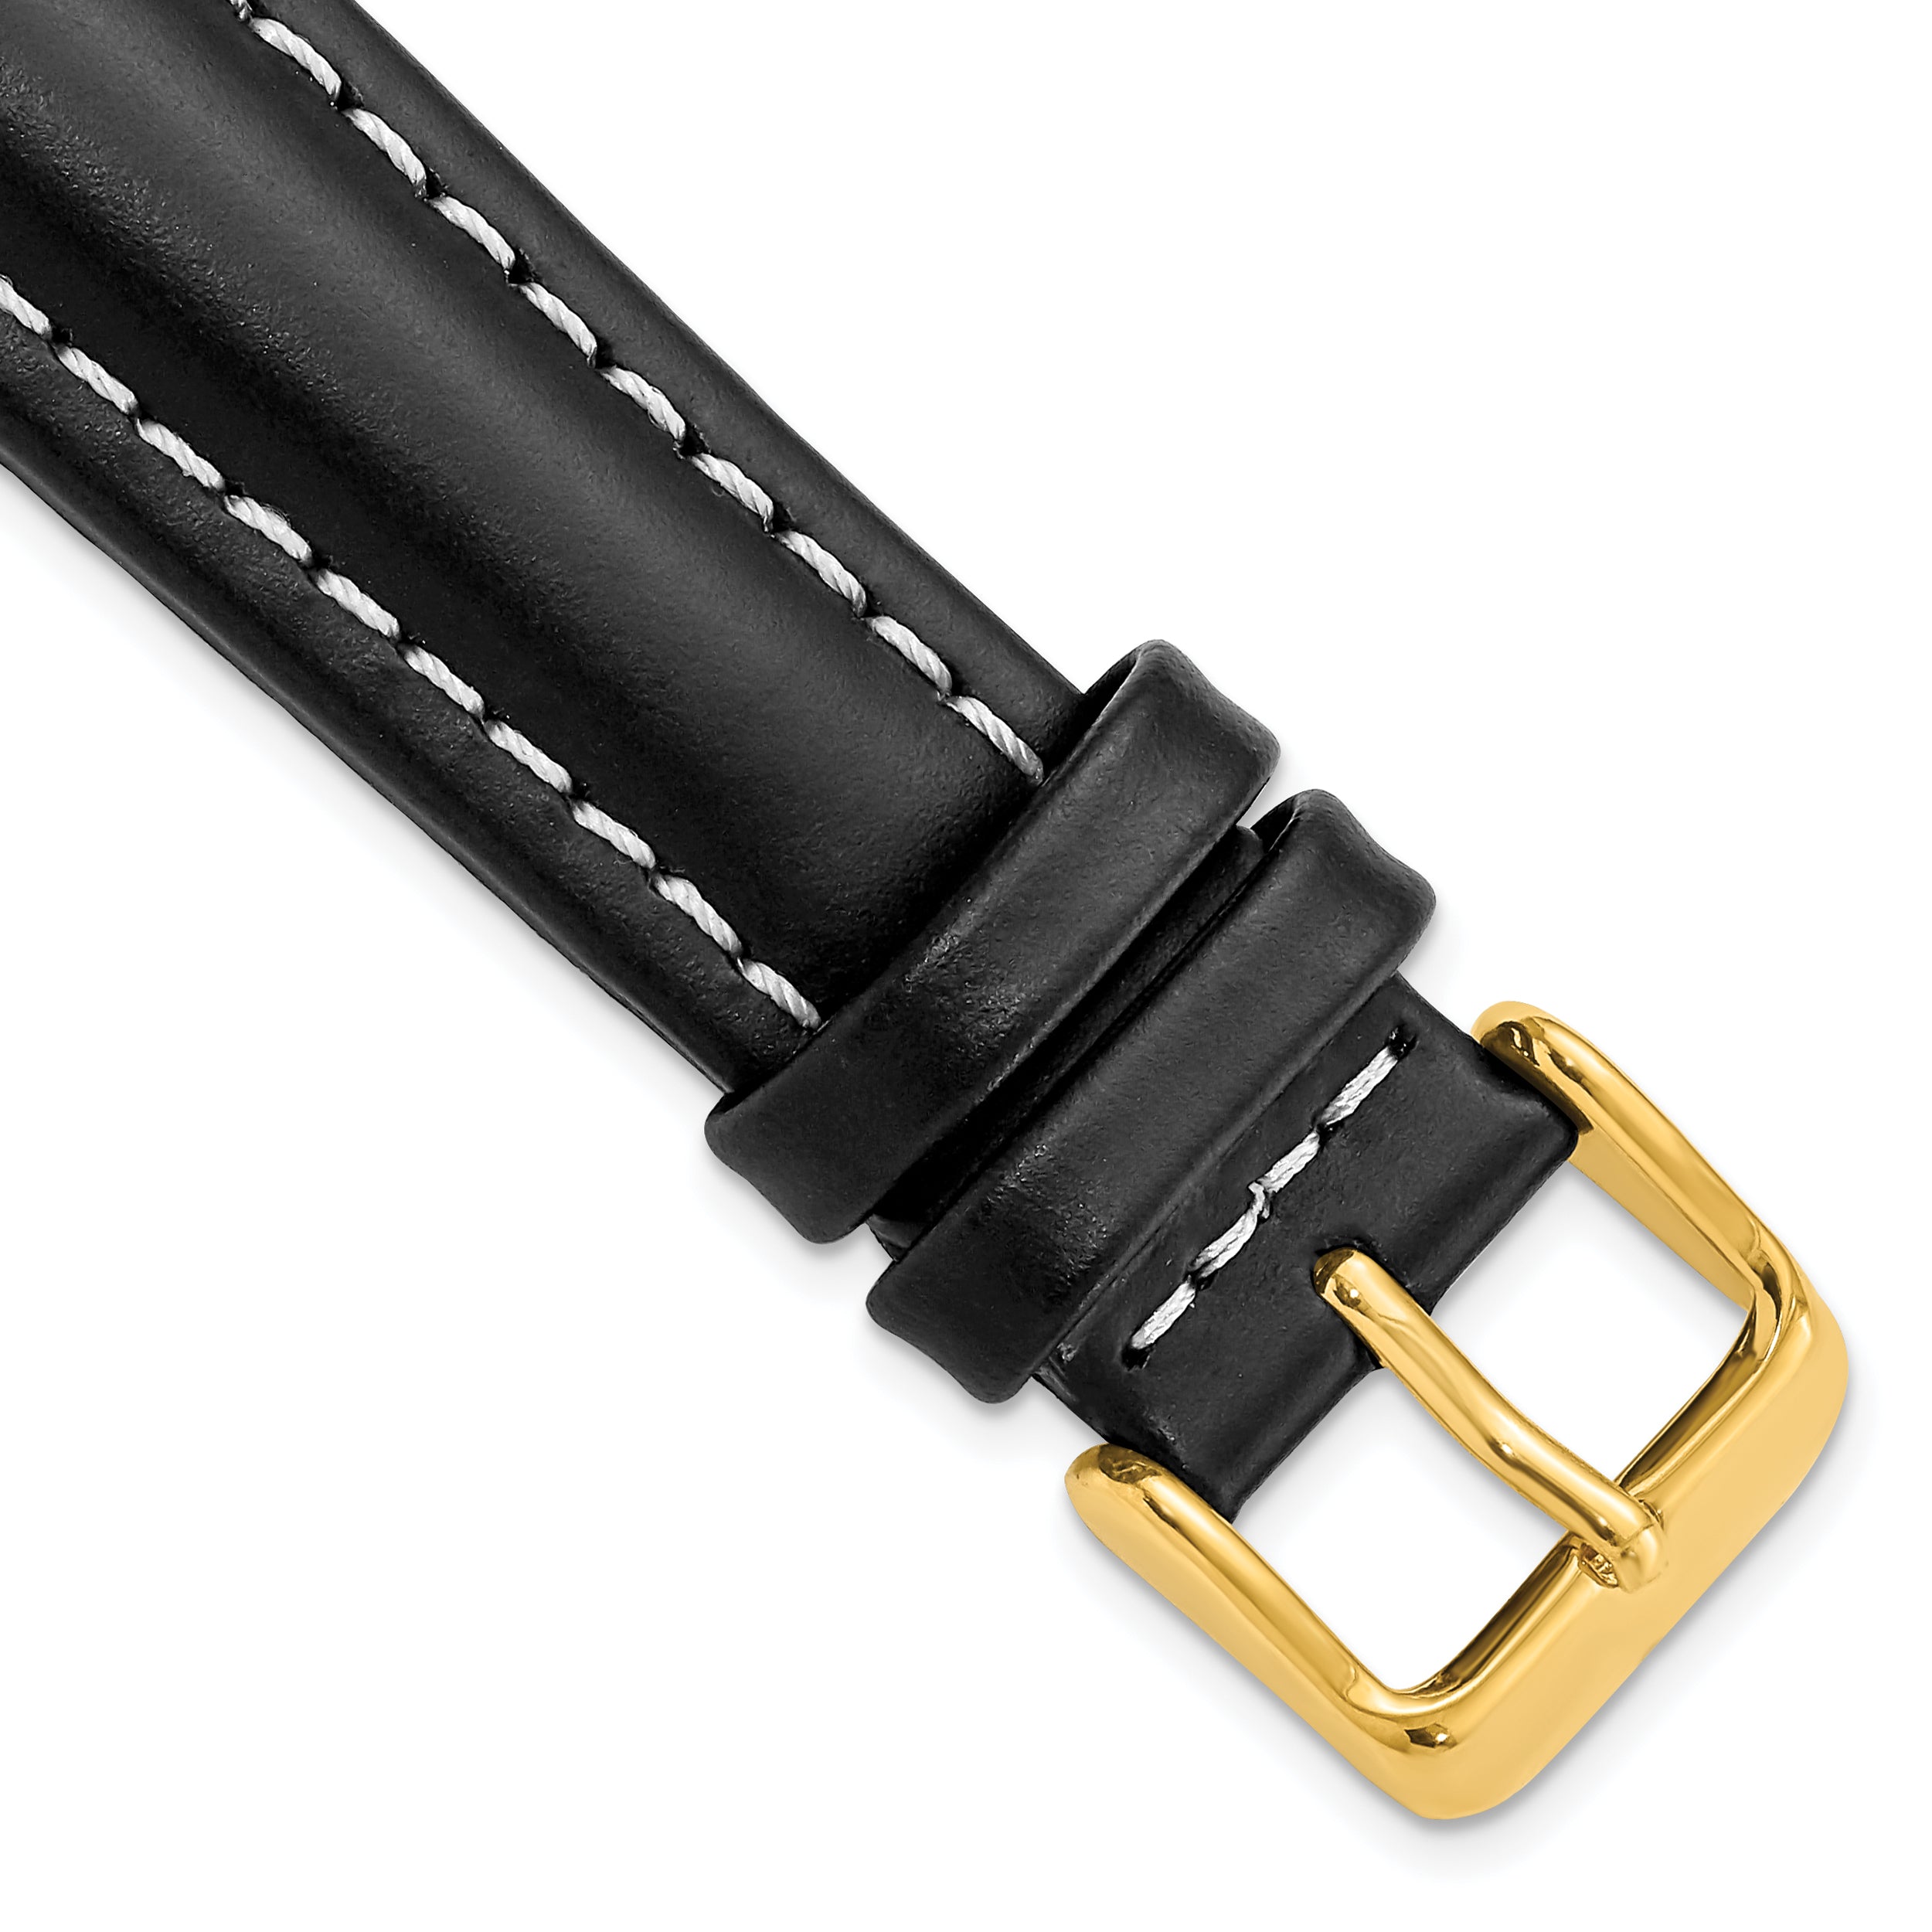 DeBeer 19mm Black Oil-tanned Leather with White Stitching and Gold-tone Buckle 7.5 inch Watch Band